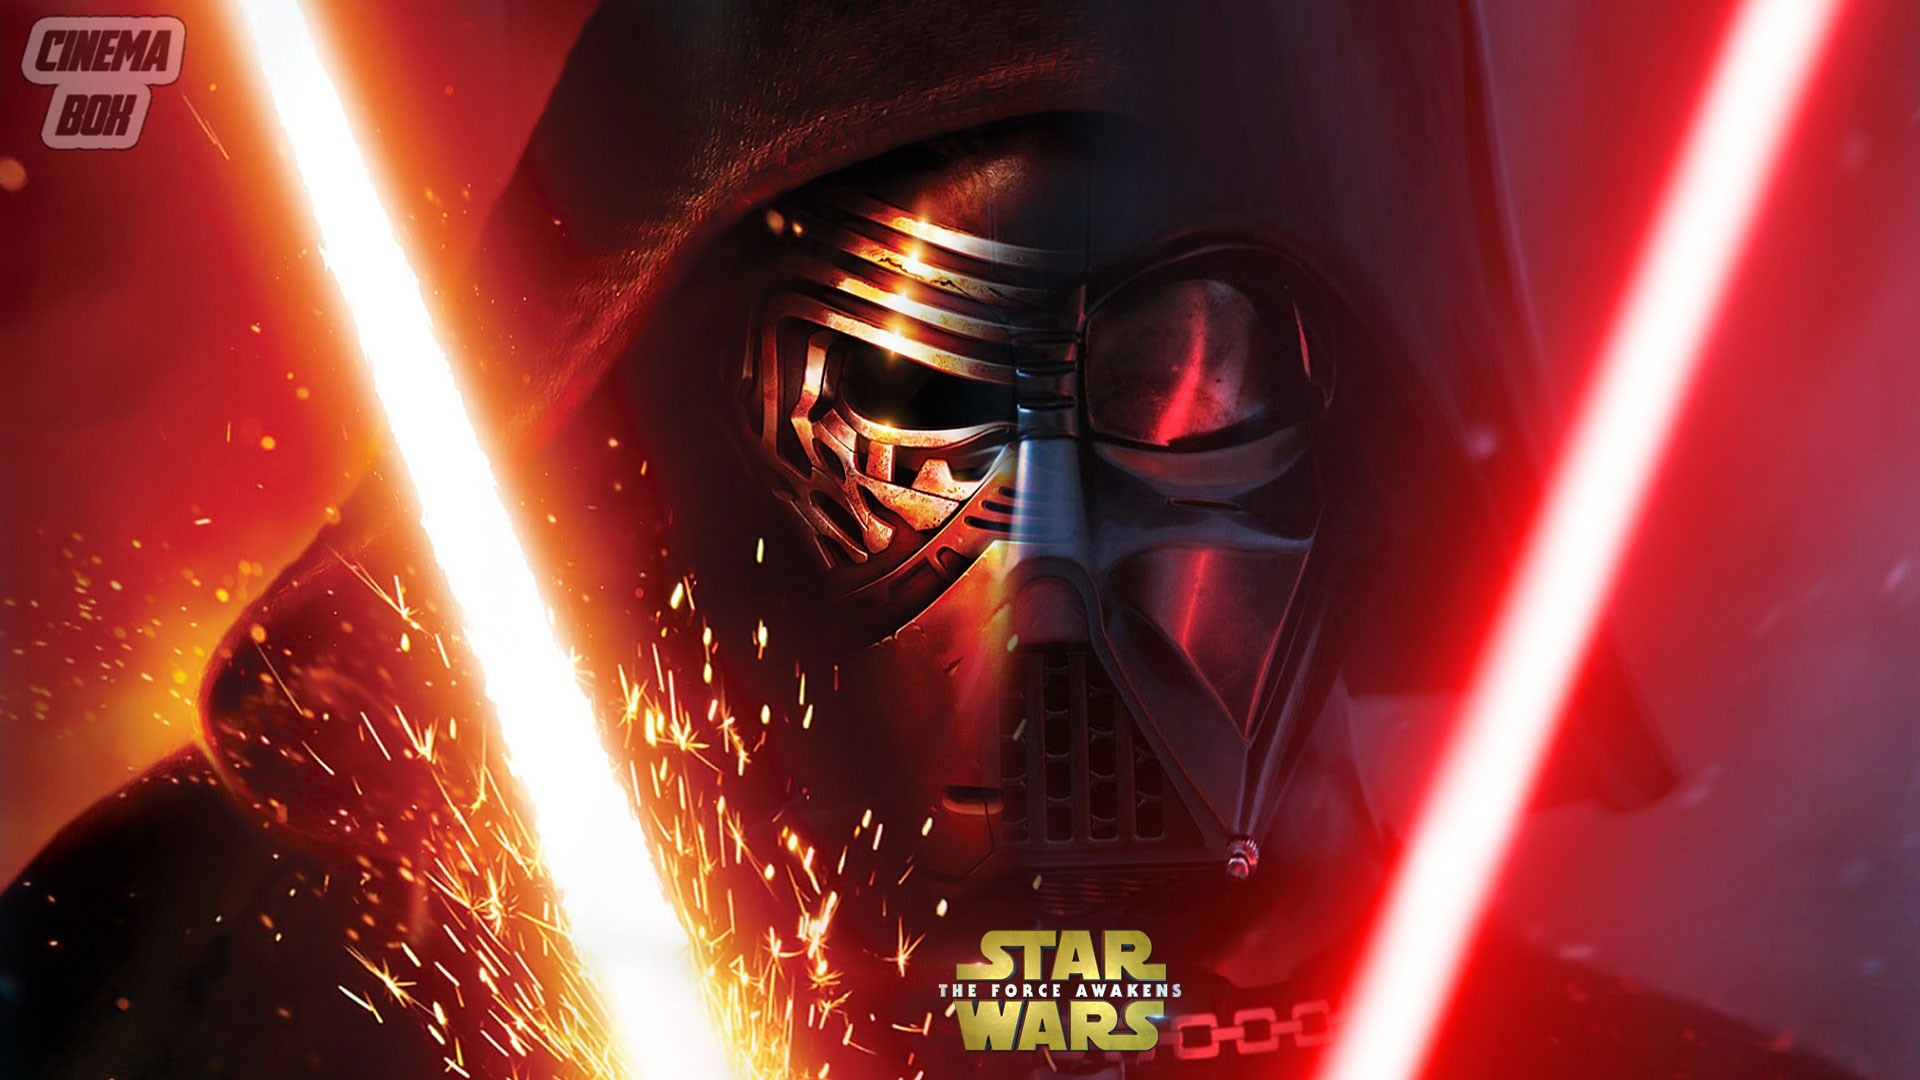 Background In High Quality – star wars episode vii the force awakens